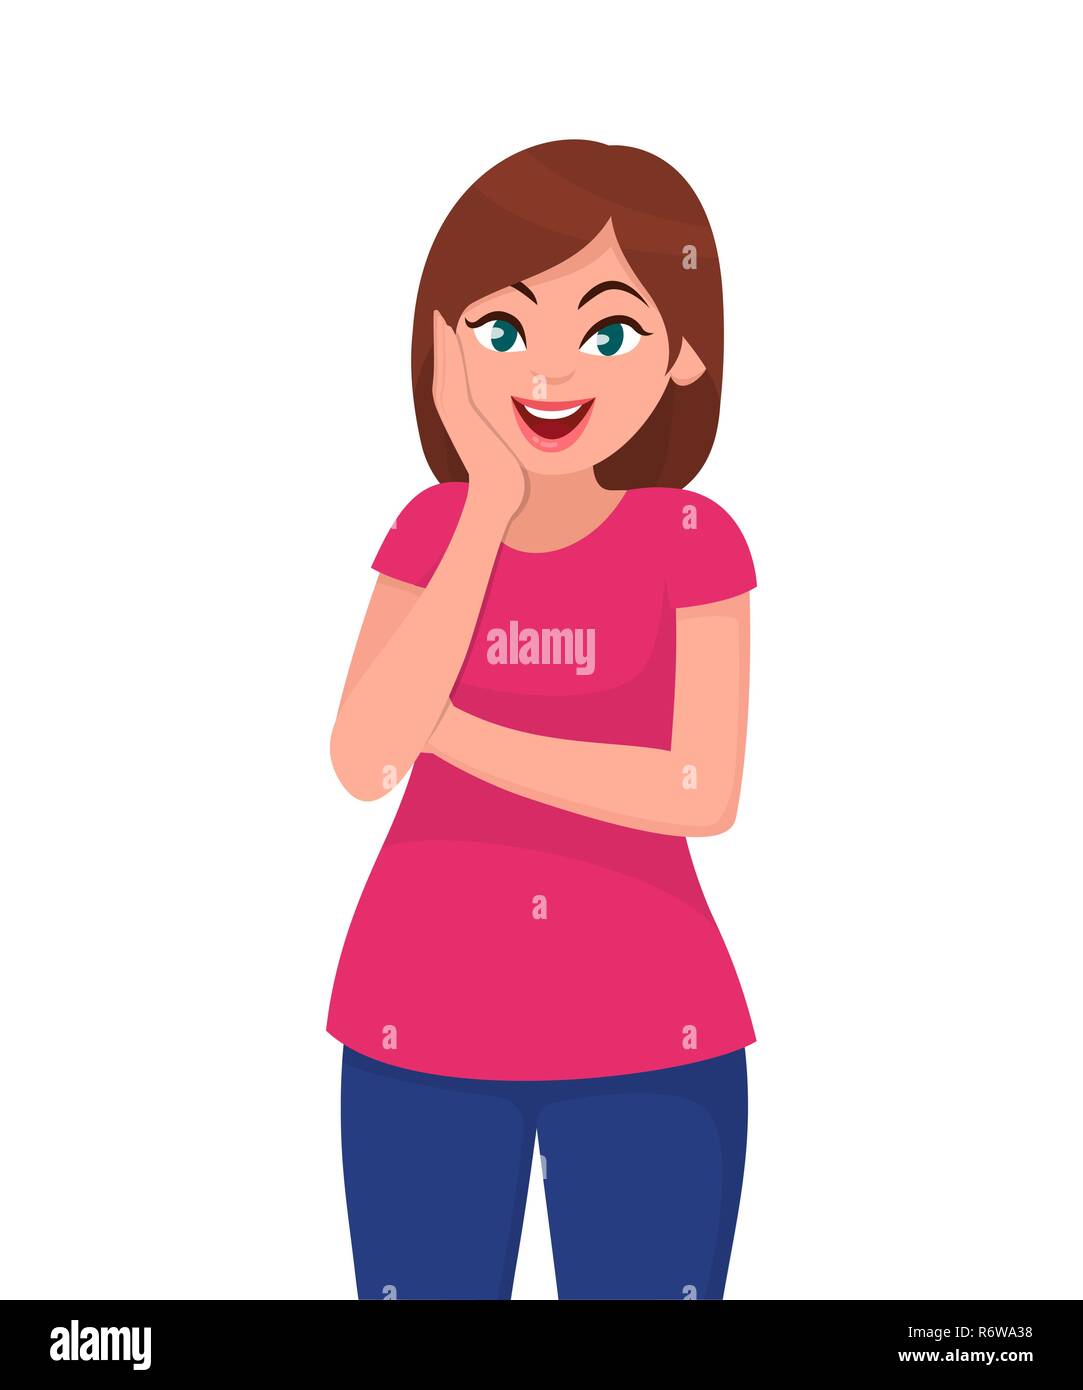 Amazed or surprised pretty young woman facial expression. Human emotion and body language concept illustration in vector cartoon flat style. Stock Vector